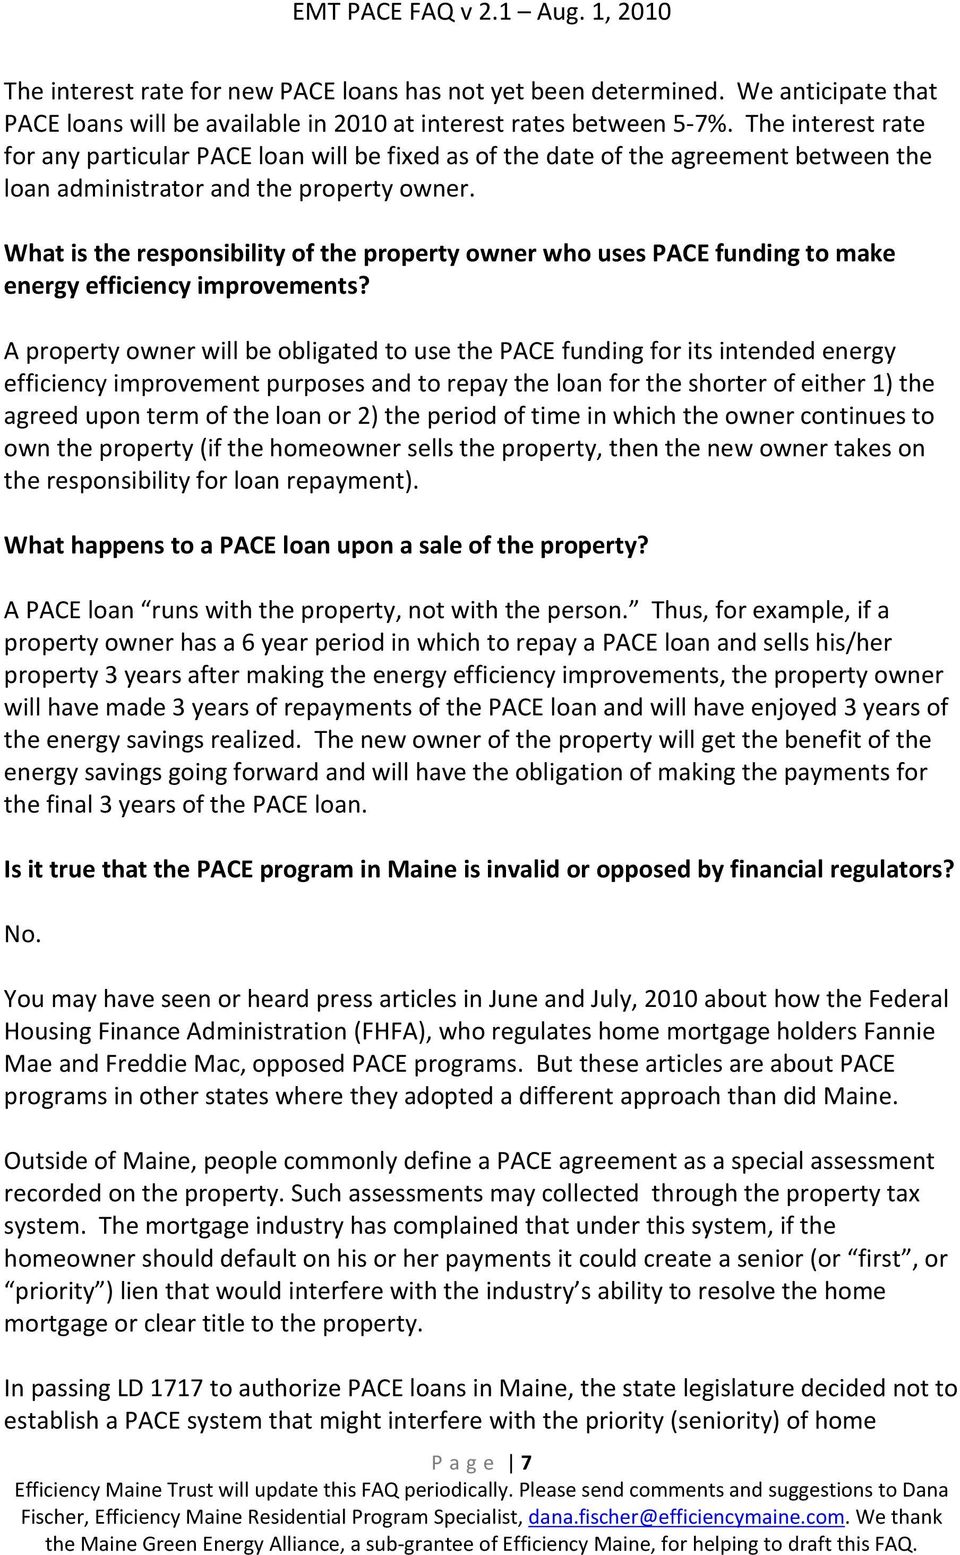 What is the responsibility of the property owner who uses PACE funding to make energy efficiency improvements?